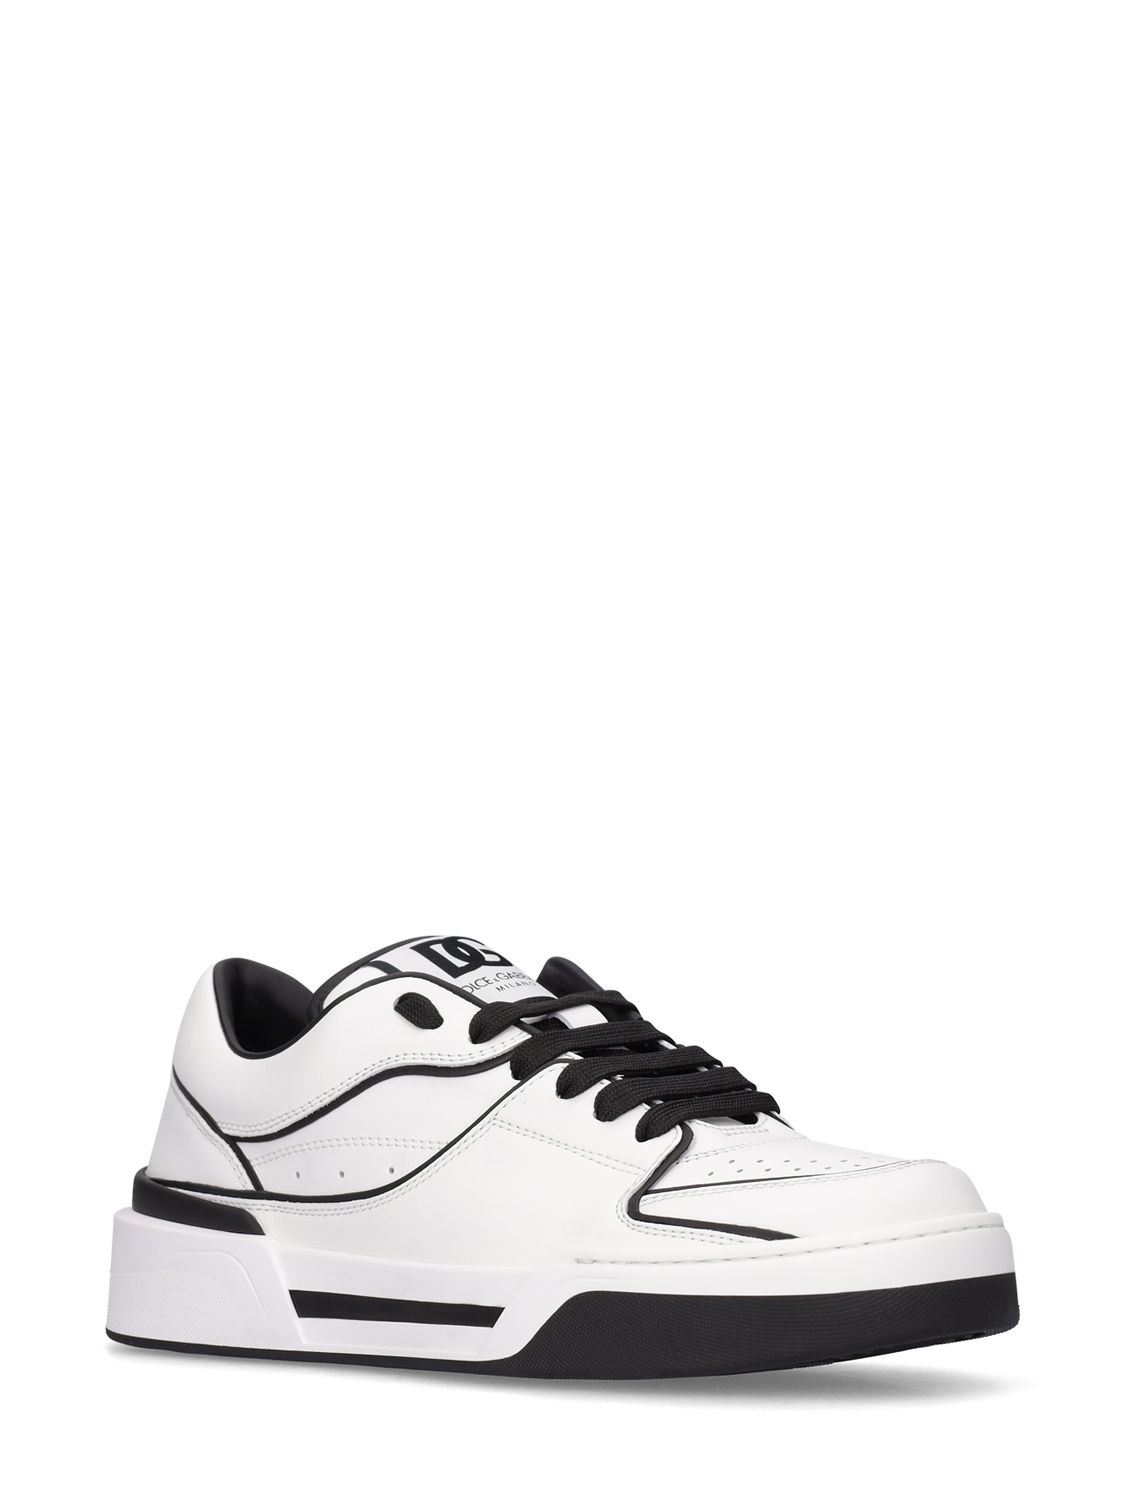 Shop Dolce & Gabbana New Roma Leather Sneakers In White,black